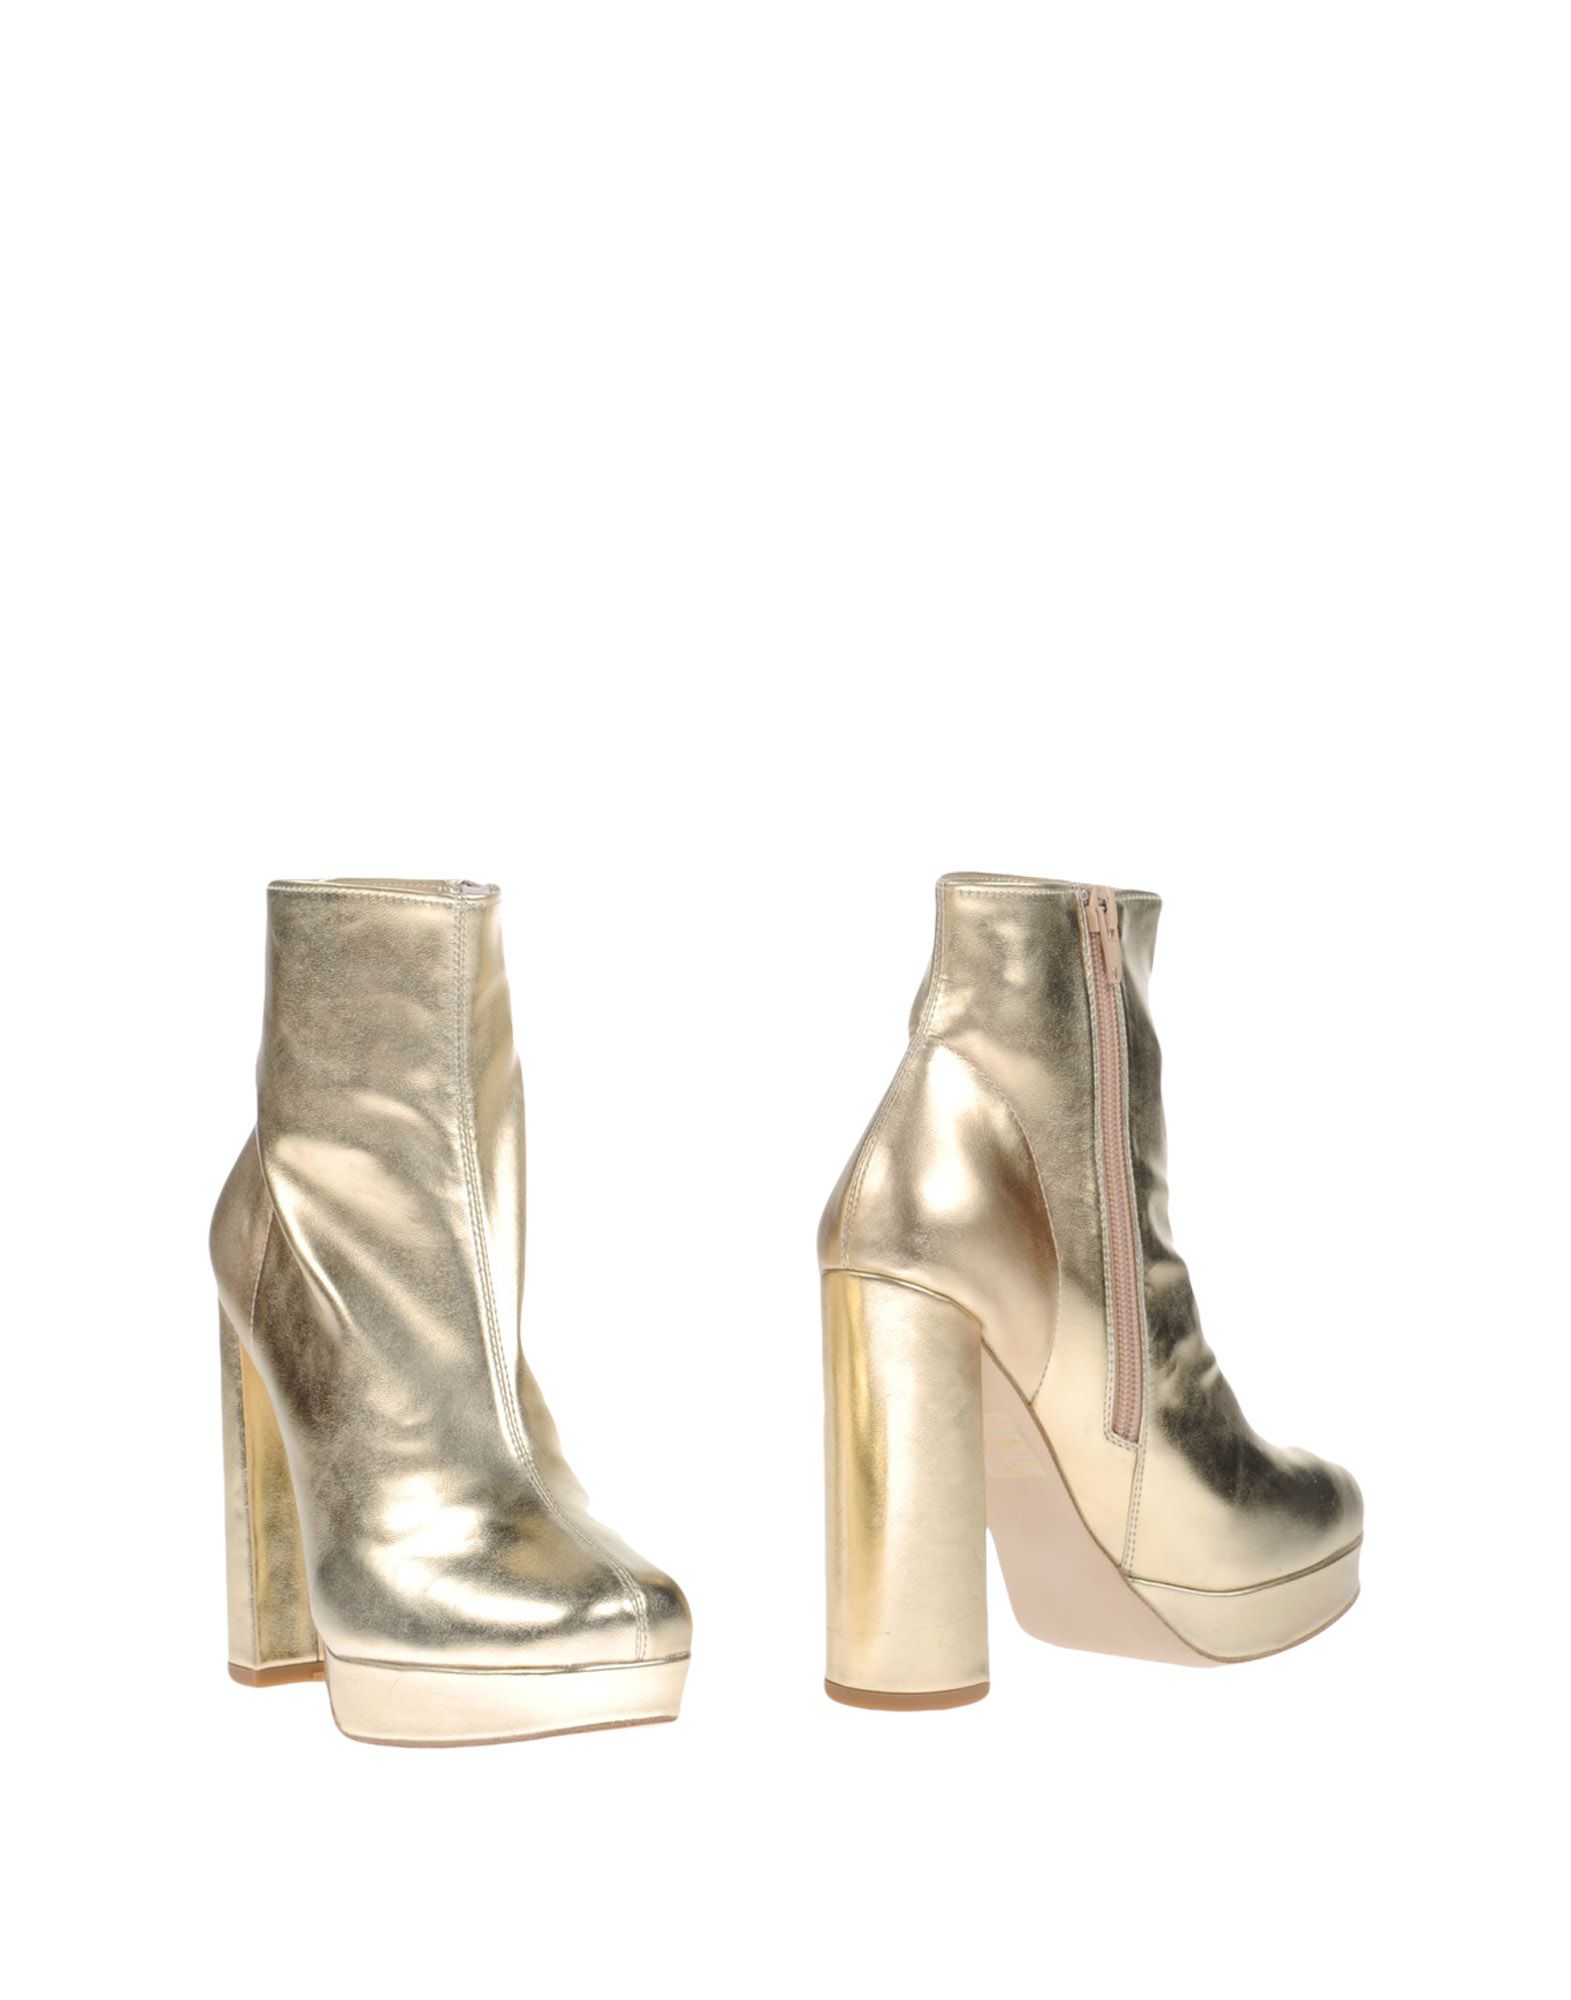 JEFFREY CAMPBELL Ankle boots; $199